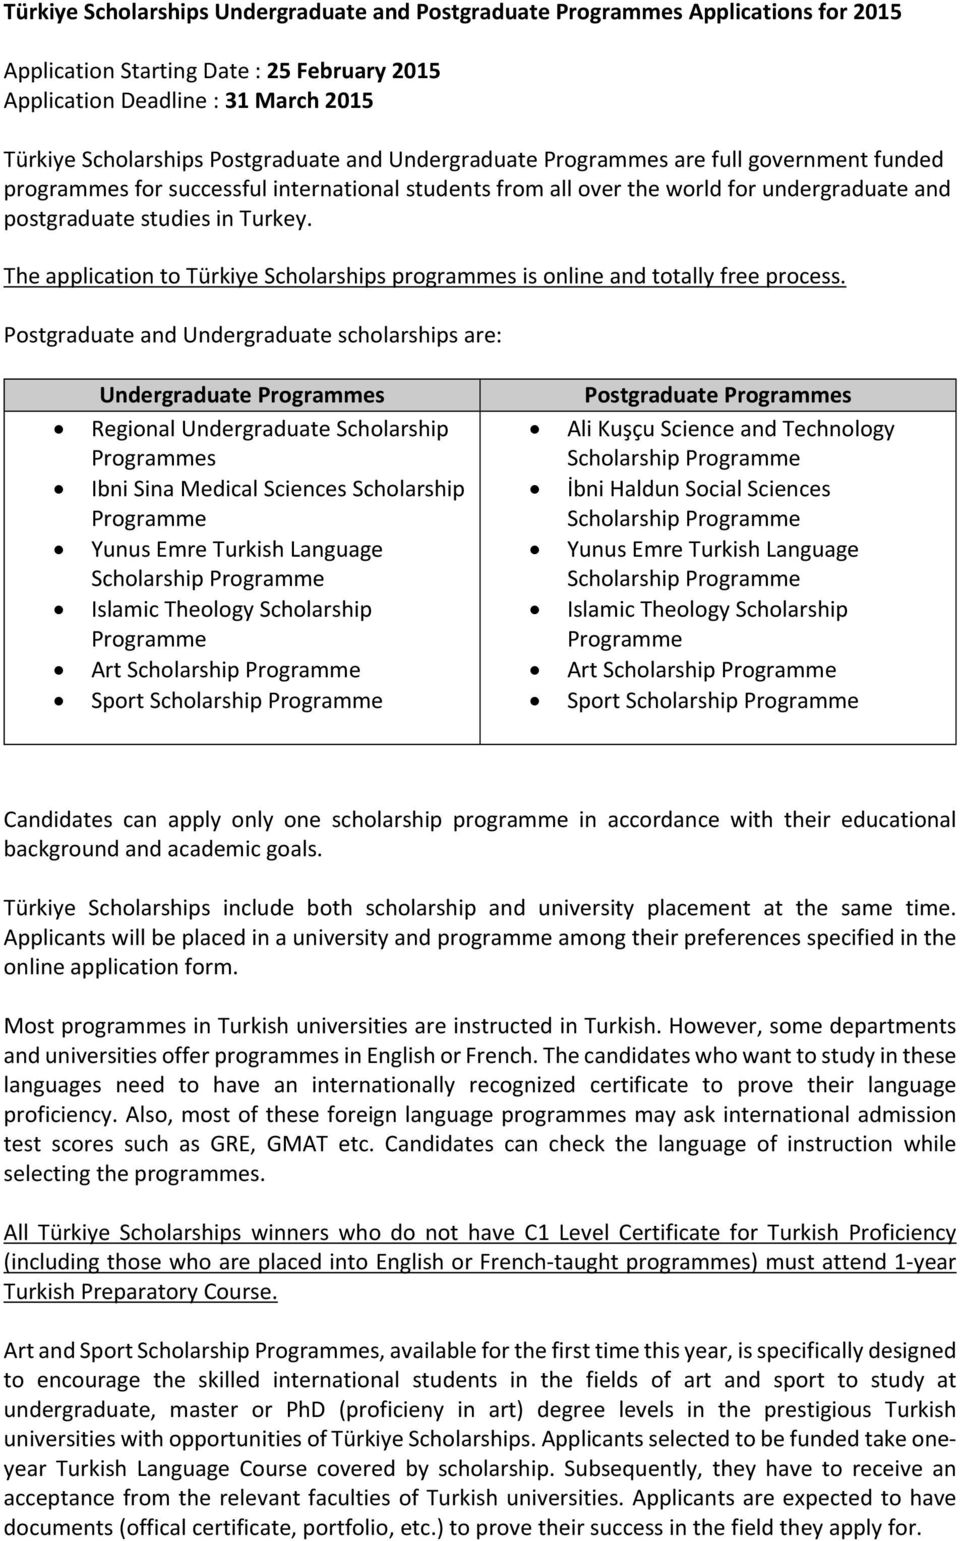 The application to Türkiye Scholarships programmes is online and totally free process.